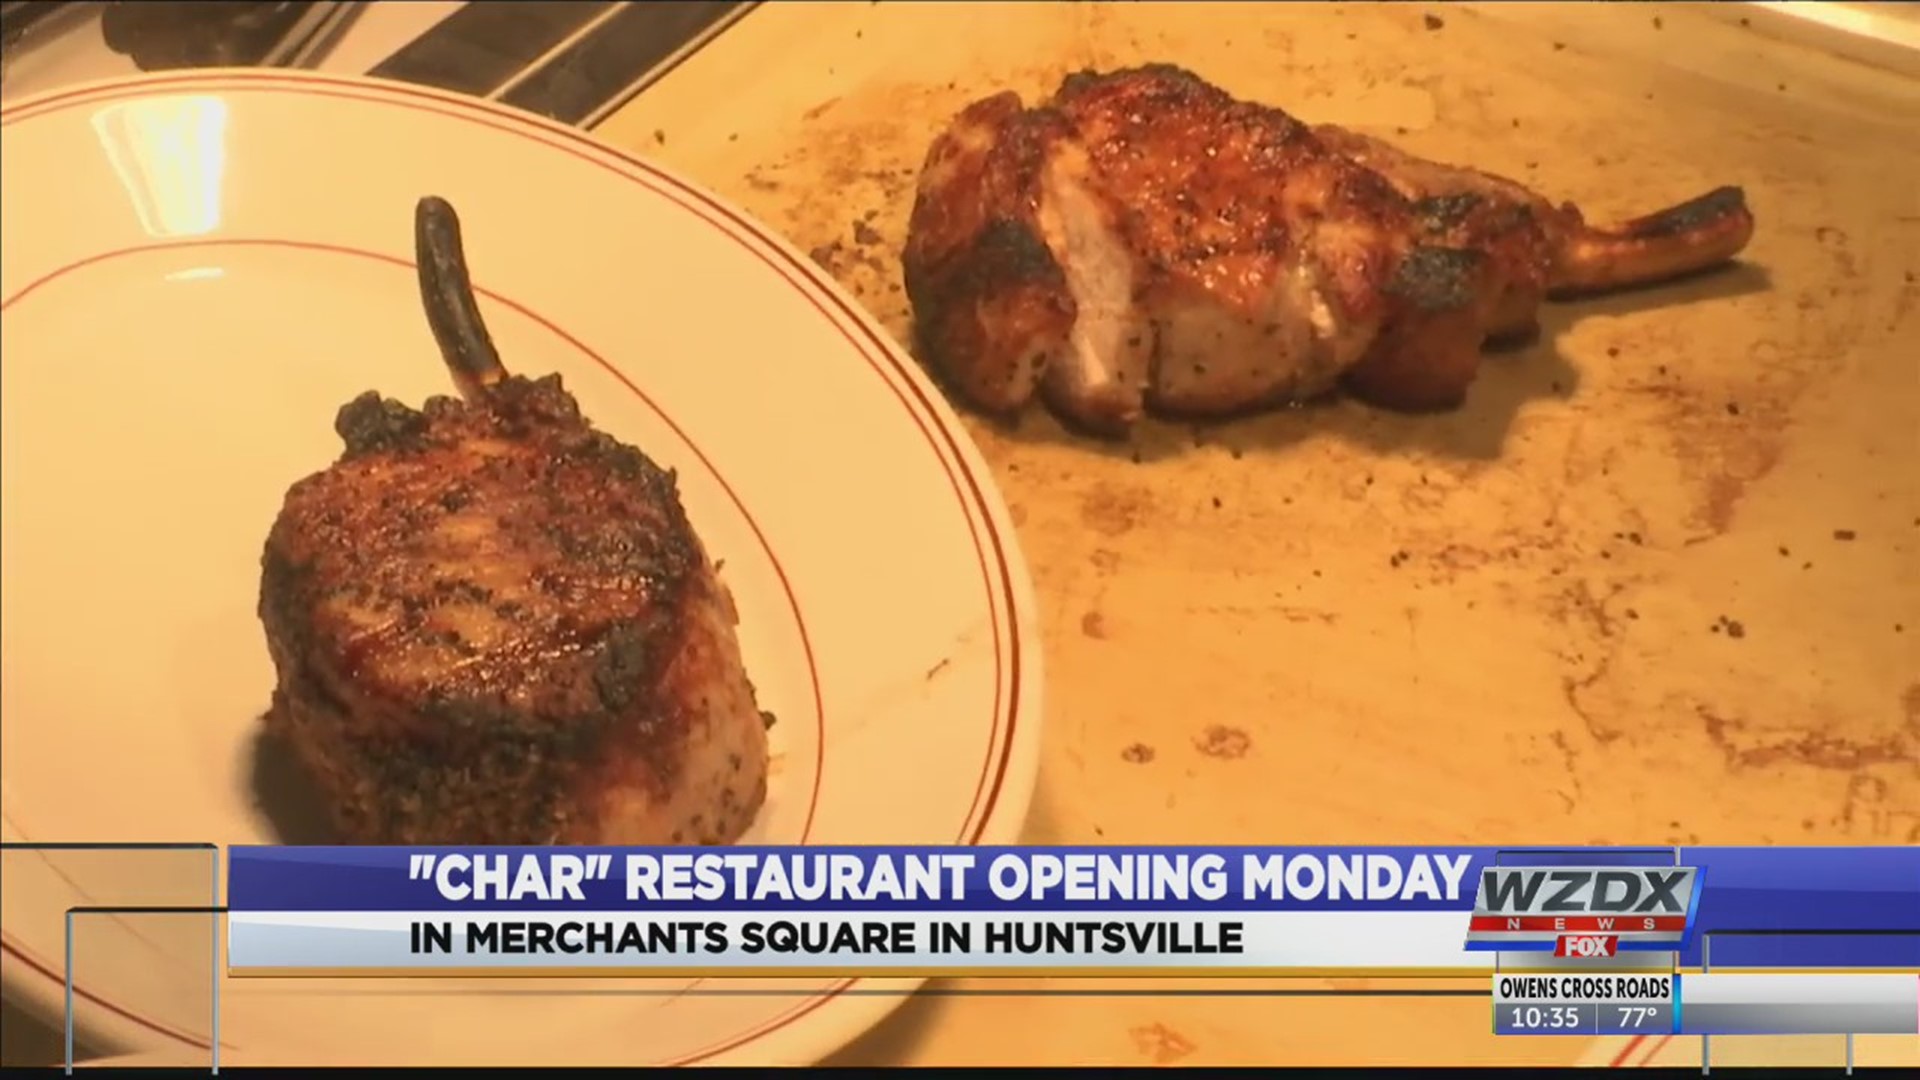 A new contemporary steakhouse is opening in Merchants Square in Huntsville.